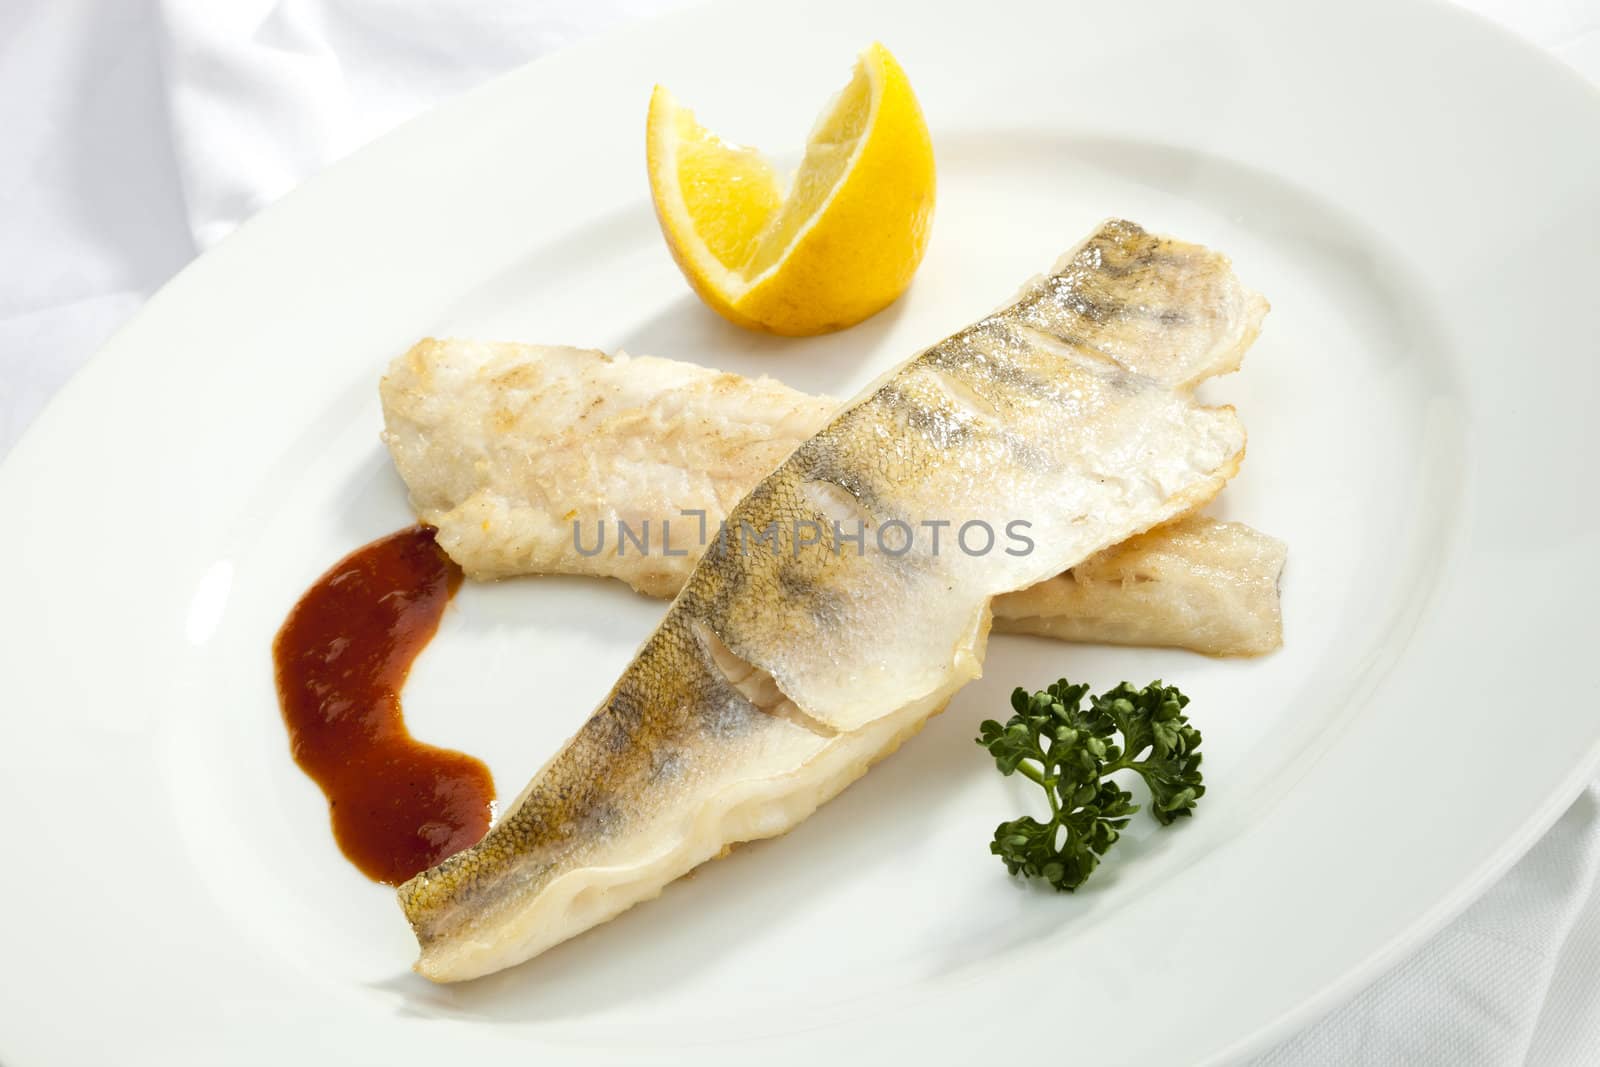 Grilled Pikeperch with lemon by hanusst